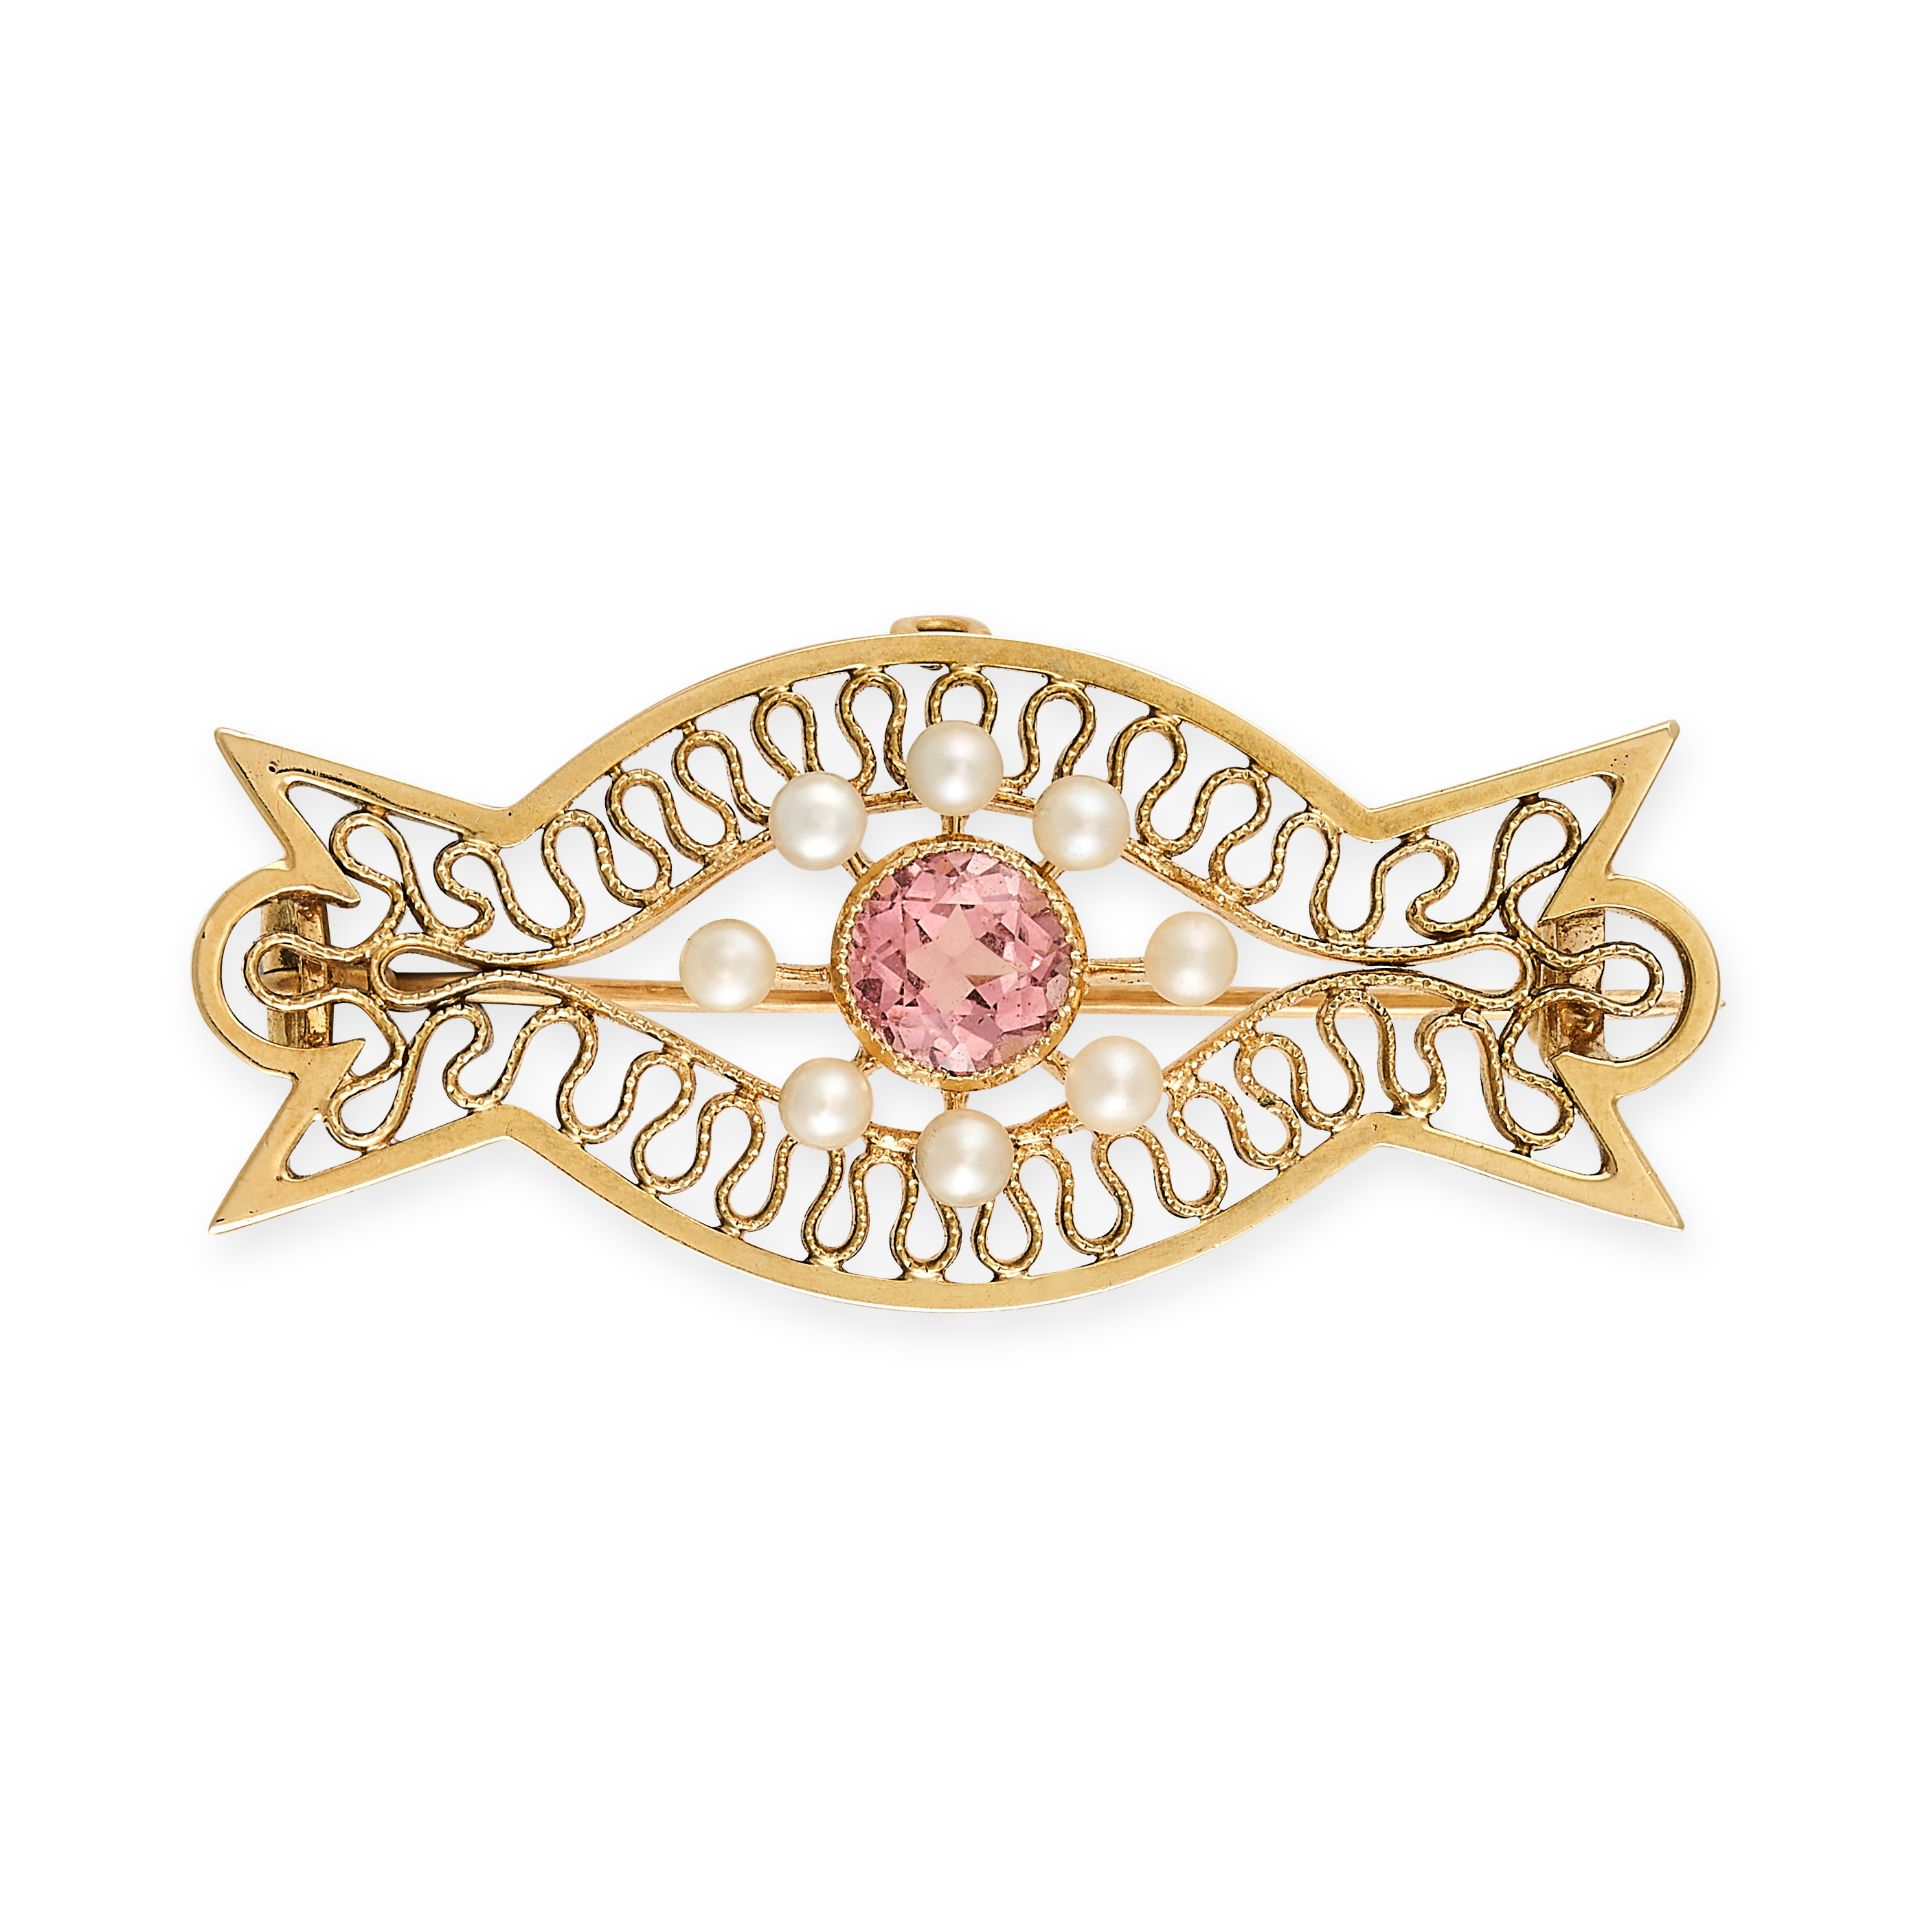 NO RESERVE - AN ANTIQUE PINK TOURMALINE AND PEARL BROOCH, EARLY 20TH CENTURY in 15ct yellow gold,